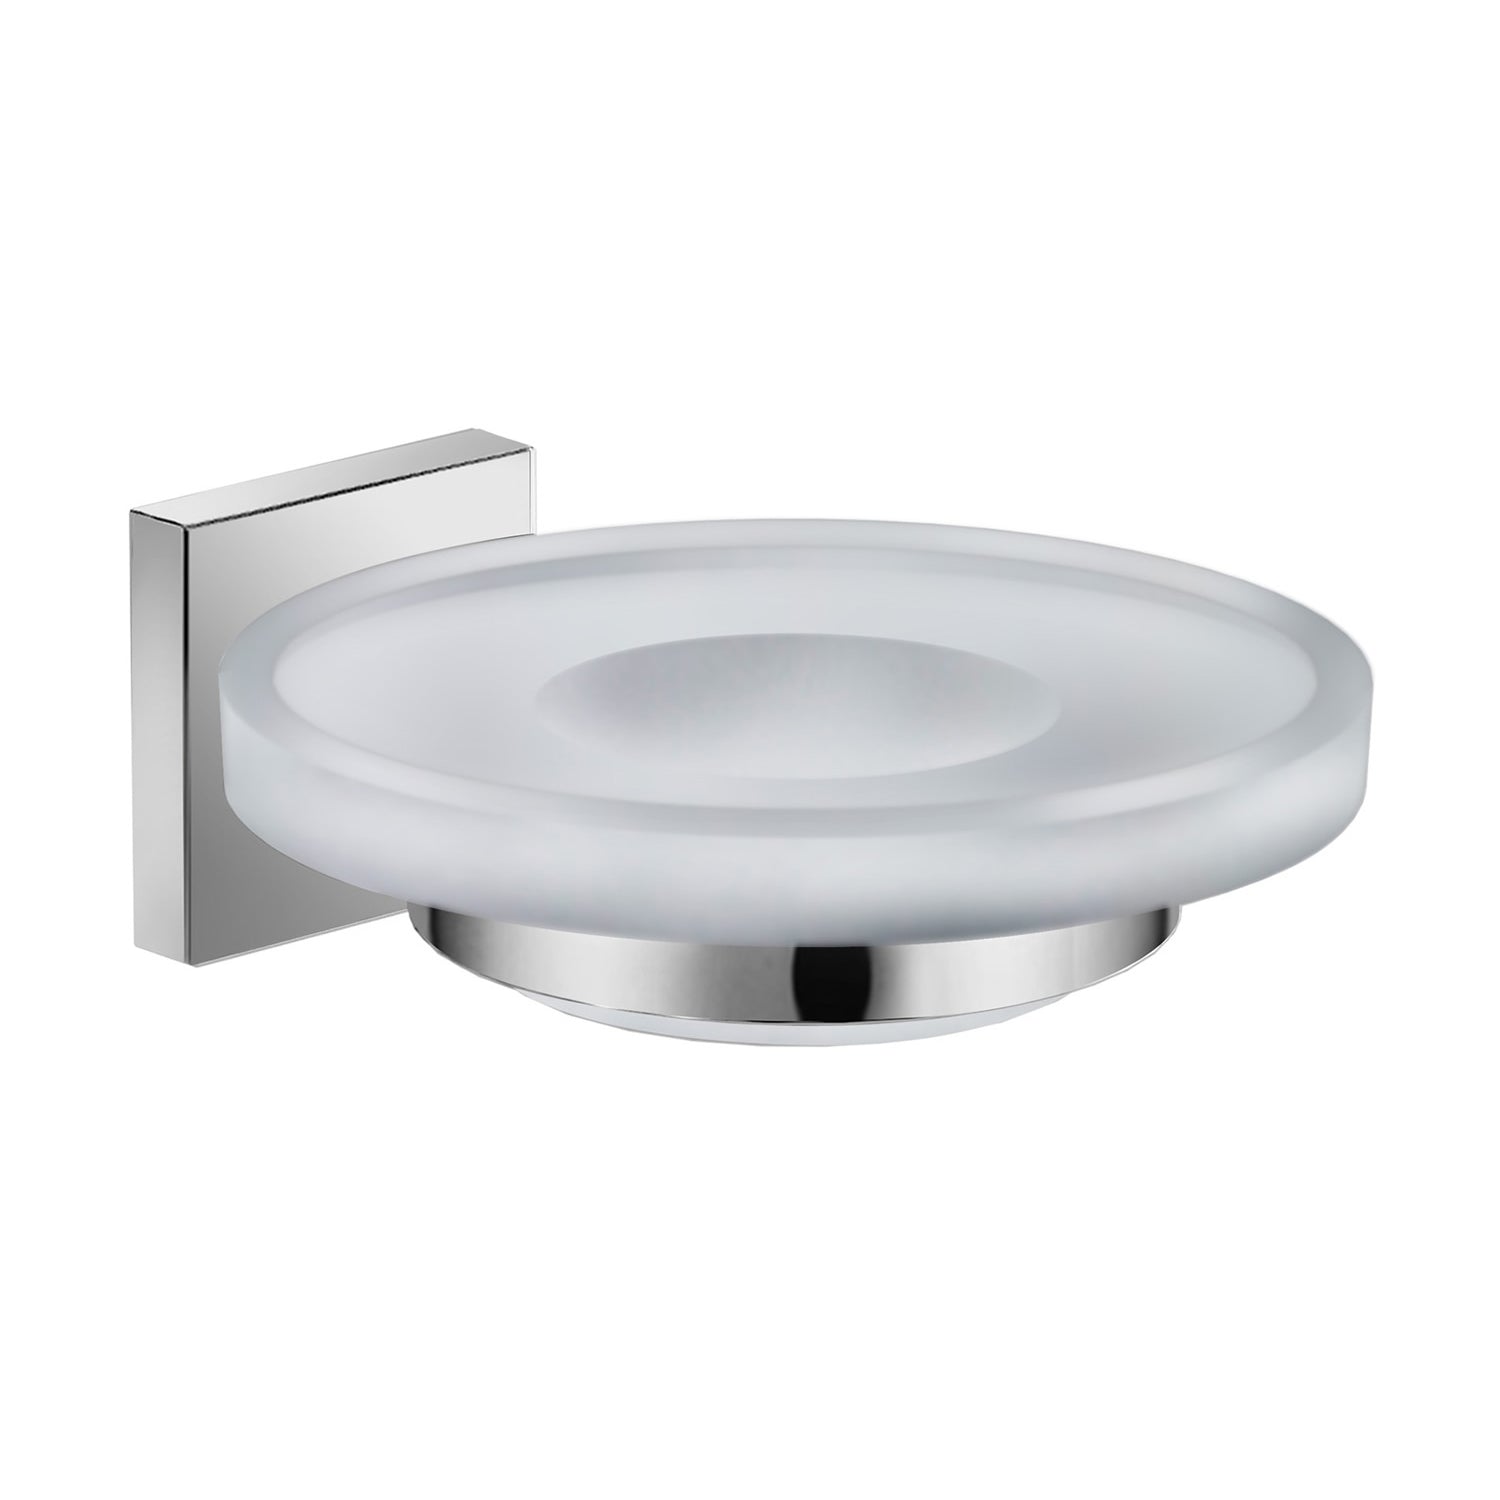 DAX Milano Soap Dish, Tray, Wall Mount, Clear Glass, Brushed Finish, 4-5/16 x 5 x 1-3/4 Inches (DAX-GDC160132-BN)